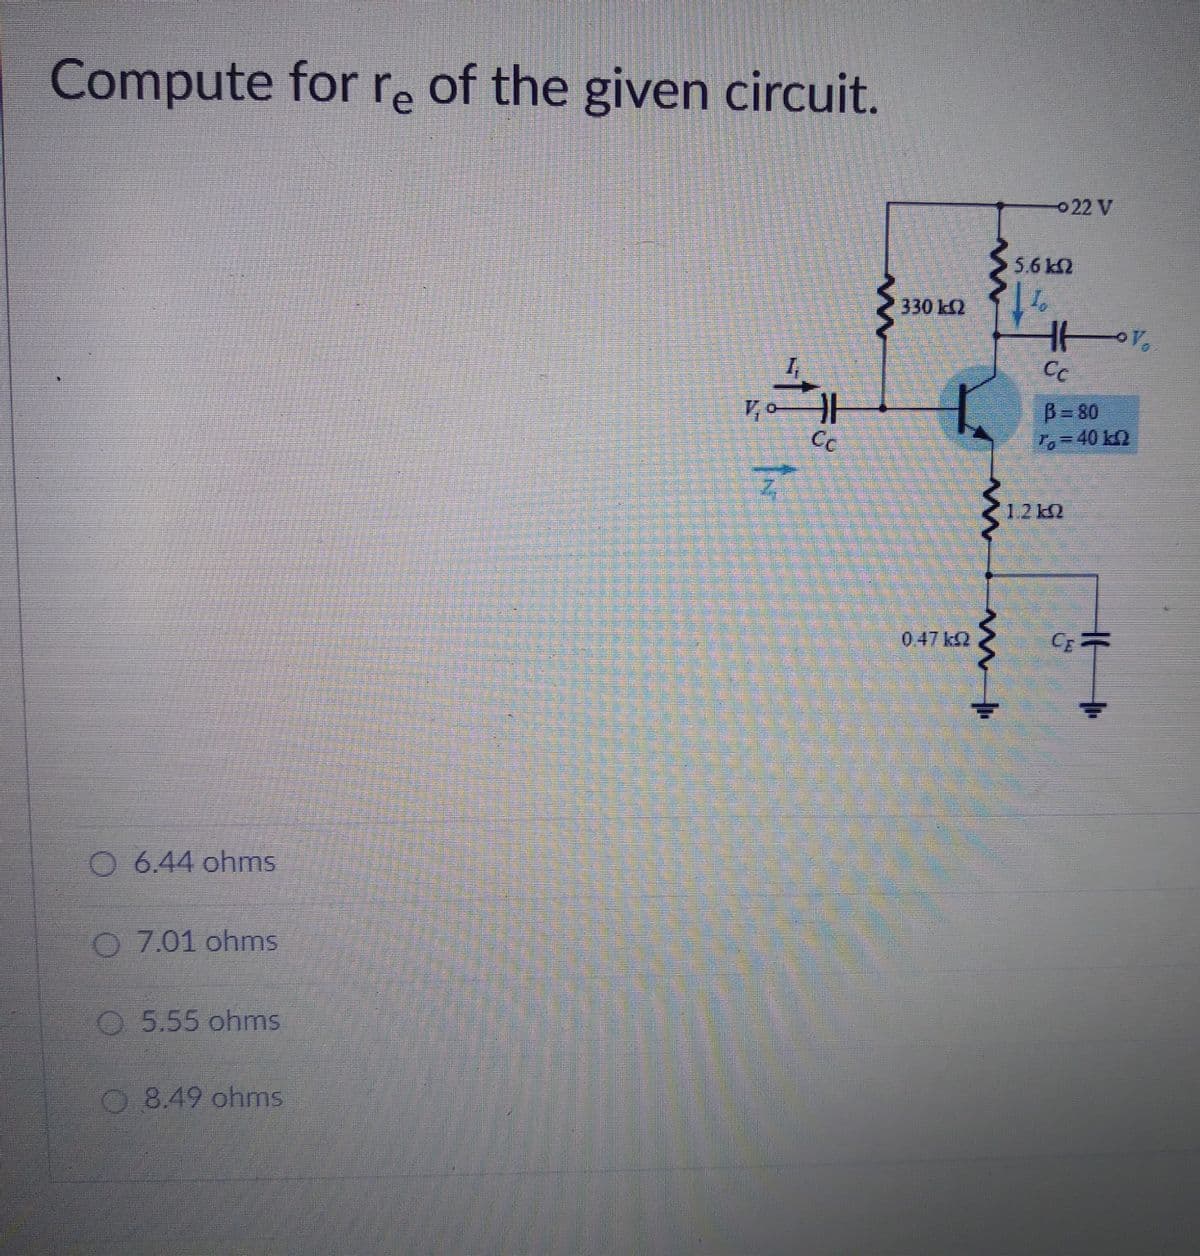 Compute for re of the given circuit.
022 V
5.6k2
330 k
Cc
B= 80
To-40 k
Cc
12k2
047k2
O 6.44 ohms
O 7.01 ohms
O5.55 ohms
8.49 ohms
